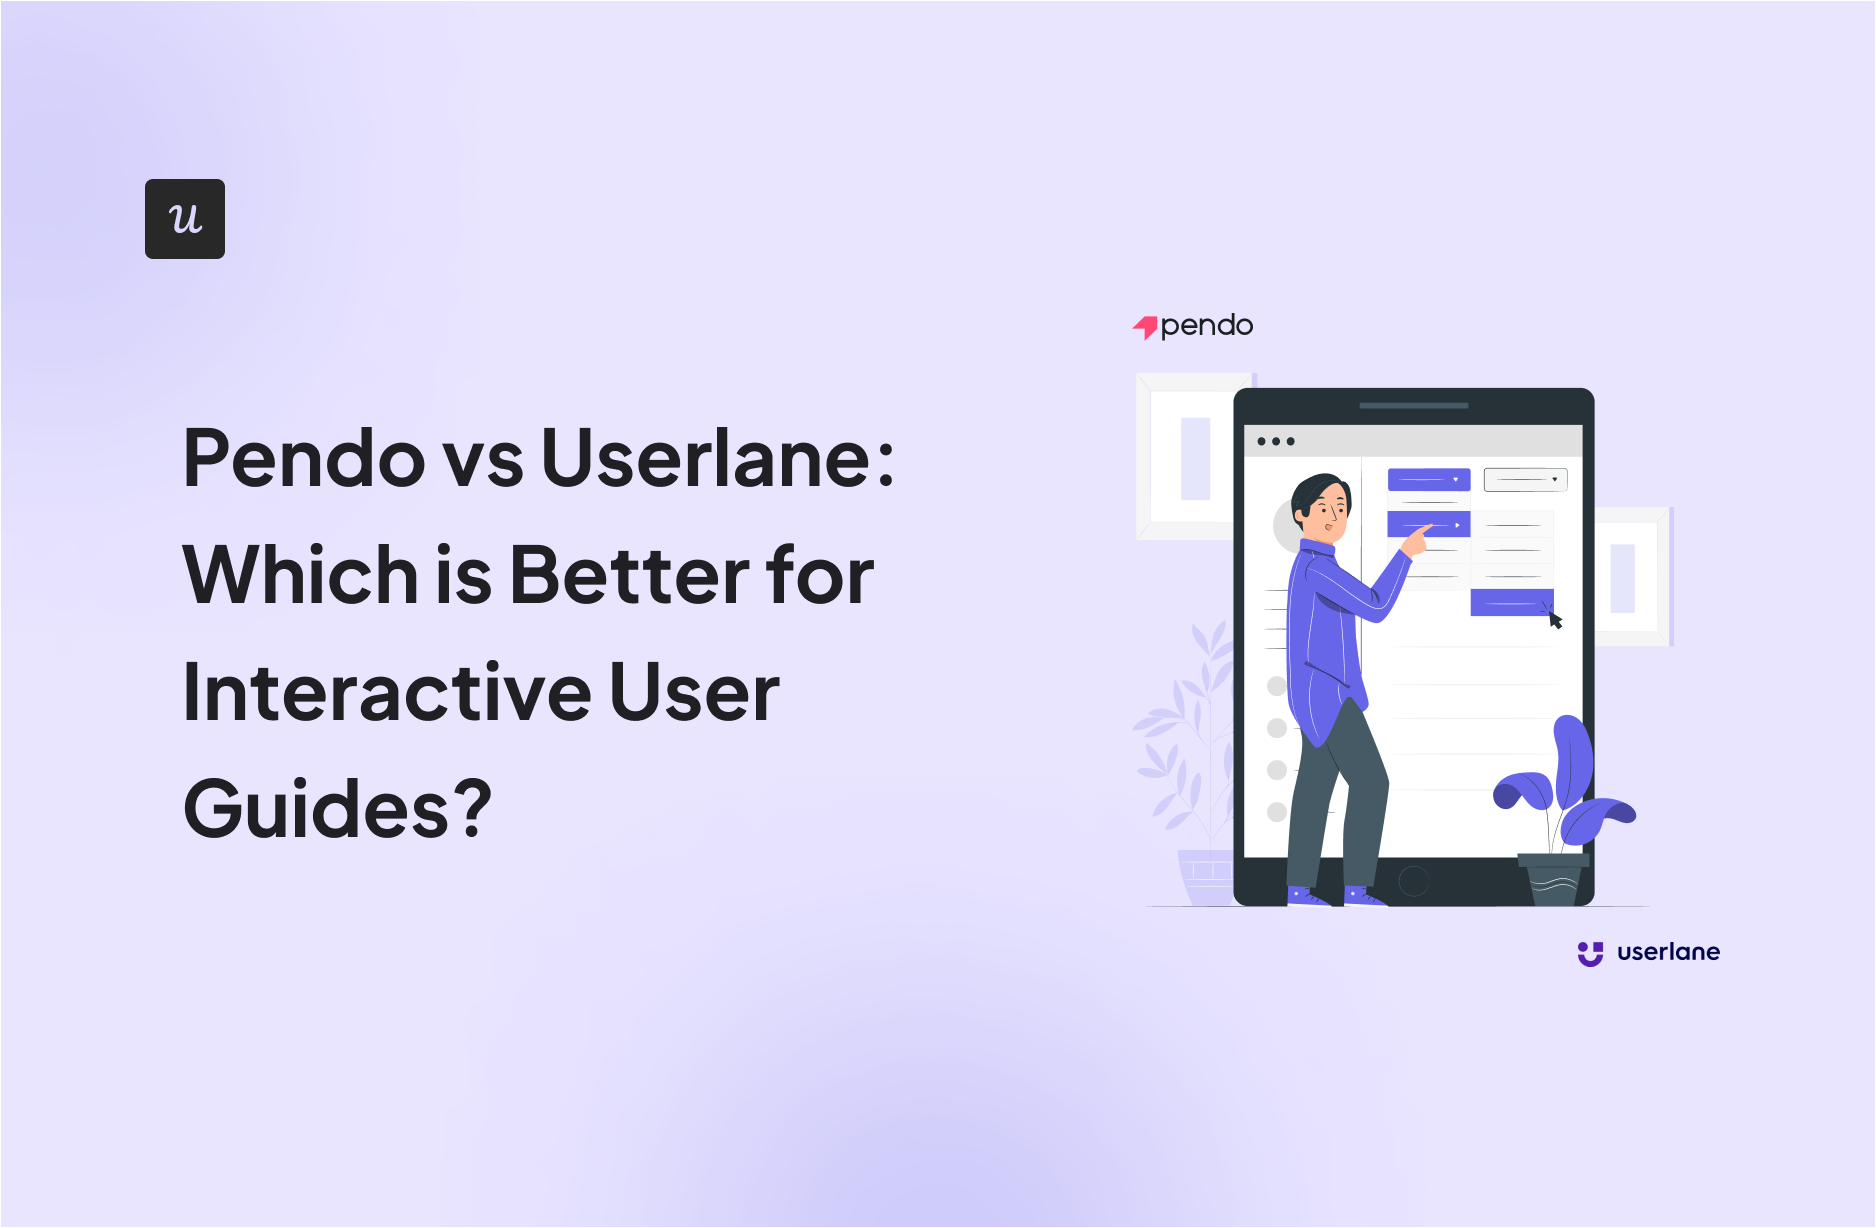 Pendo vs Userlane: Which is Better for Interactive User Guides?